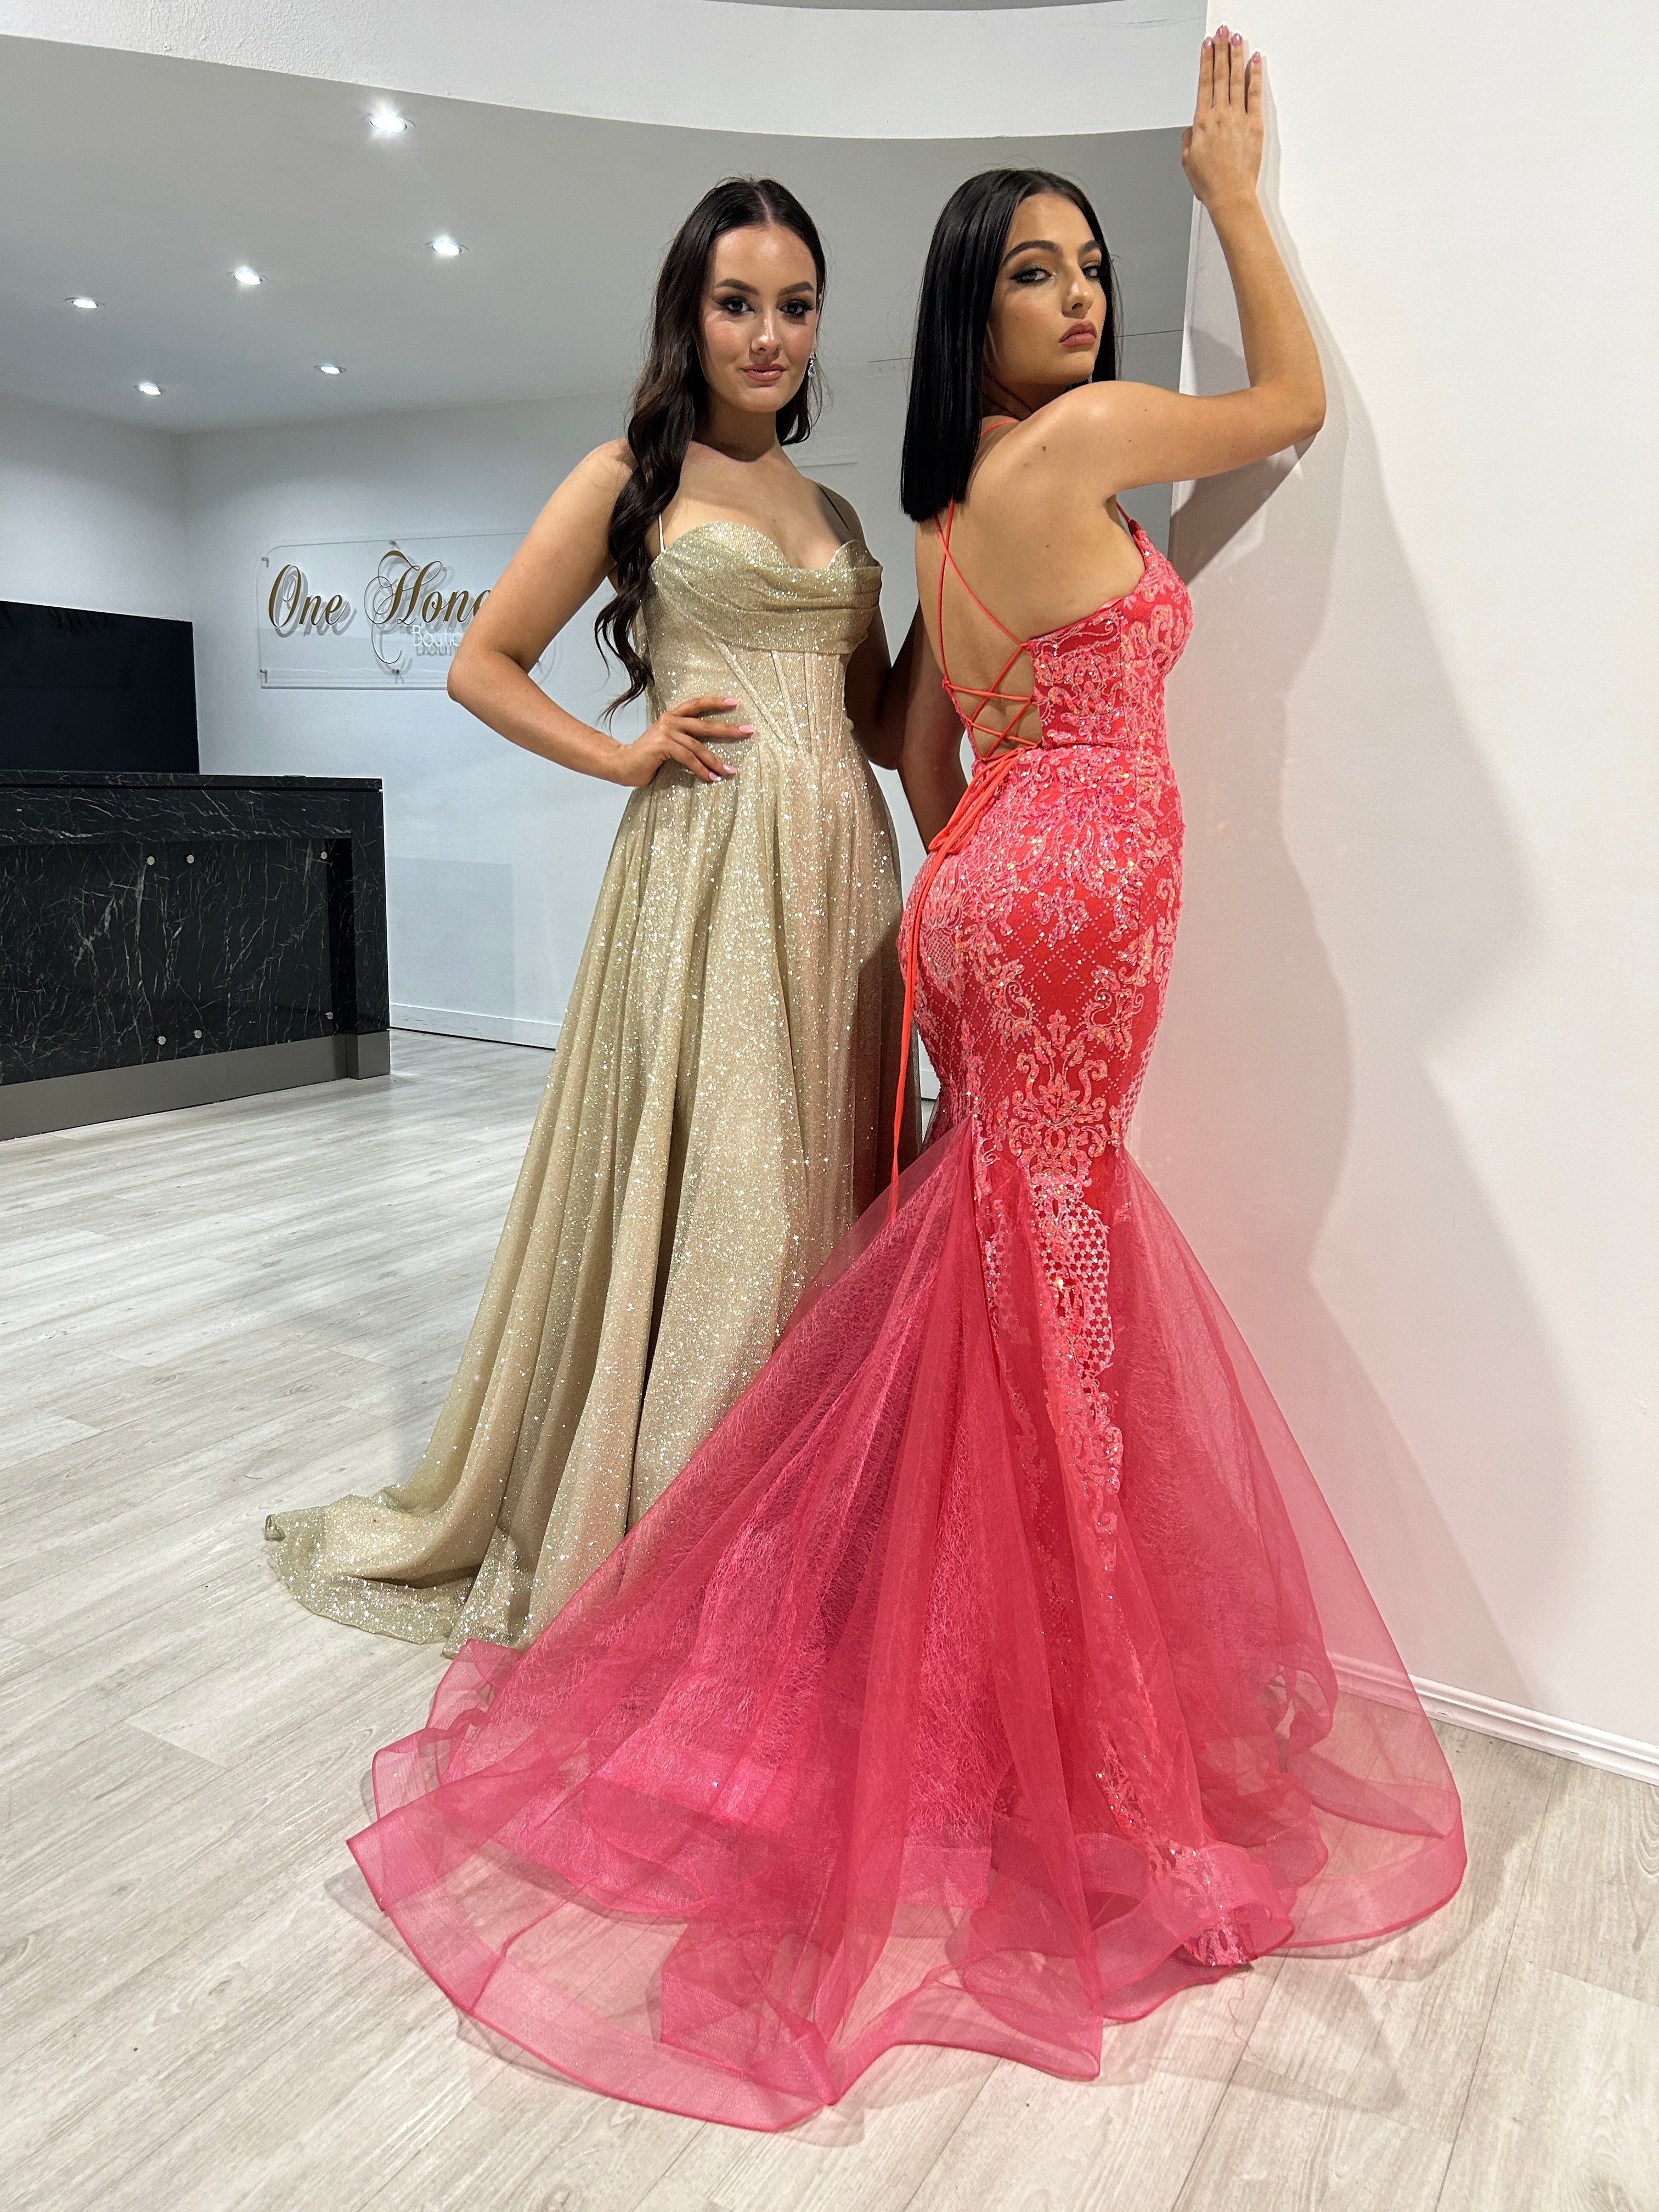 Honey Couture SHAYLA Coral Sequin Glitter Fishtail Mermaid Formal Dress